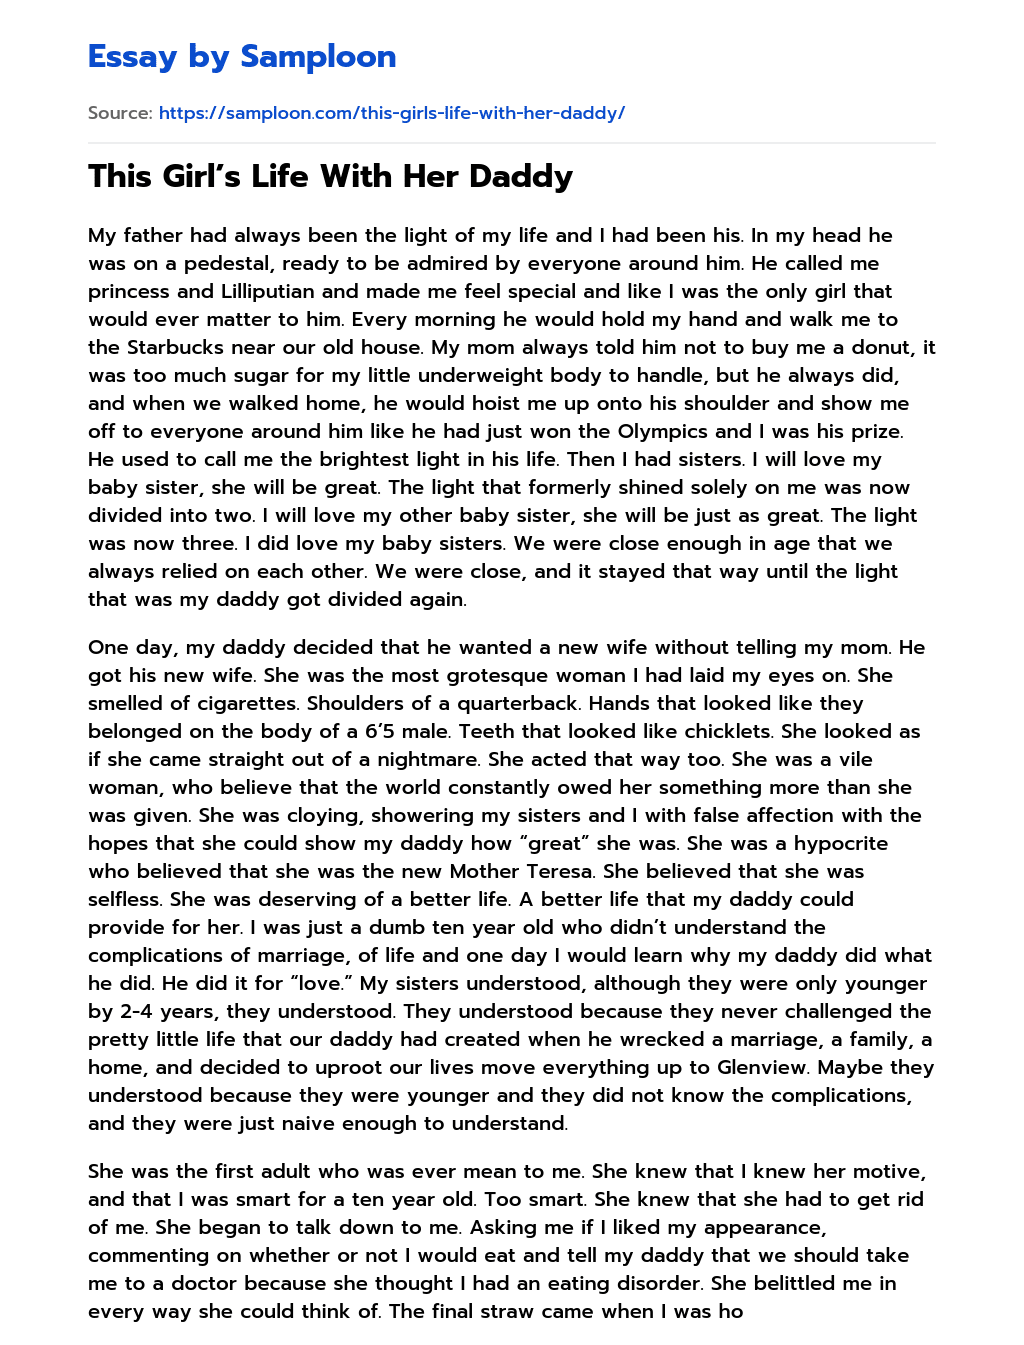 This Girl’s Life With Her Daddy essay